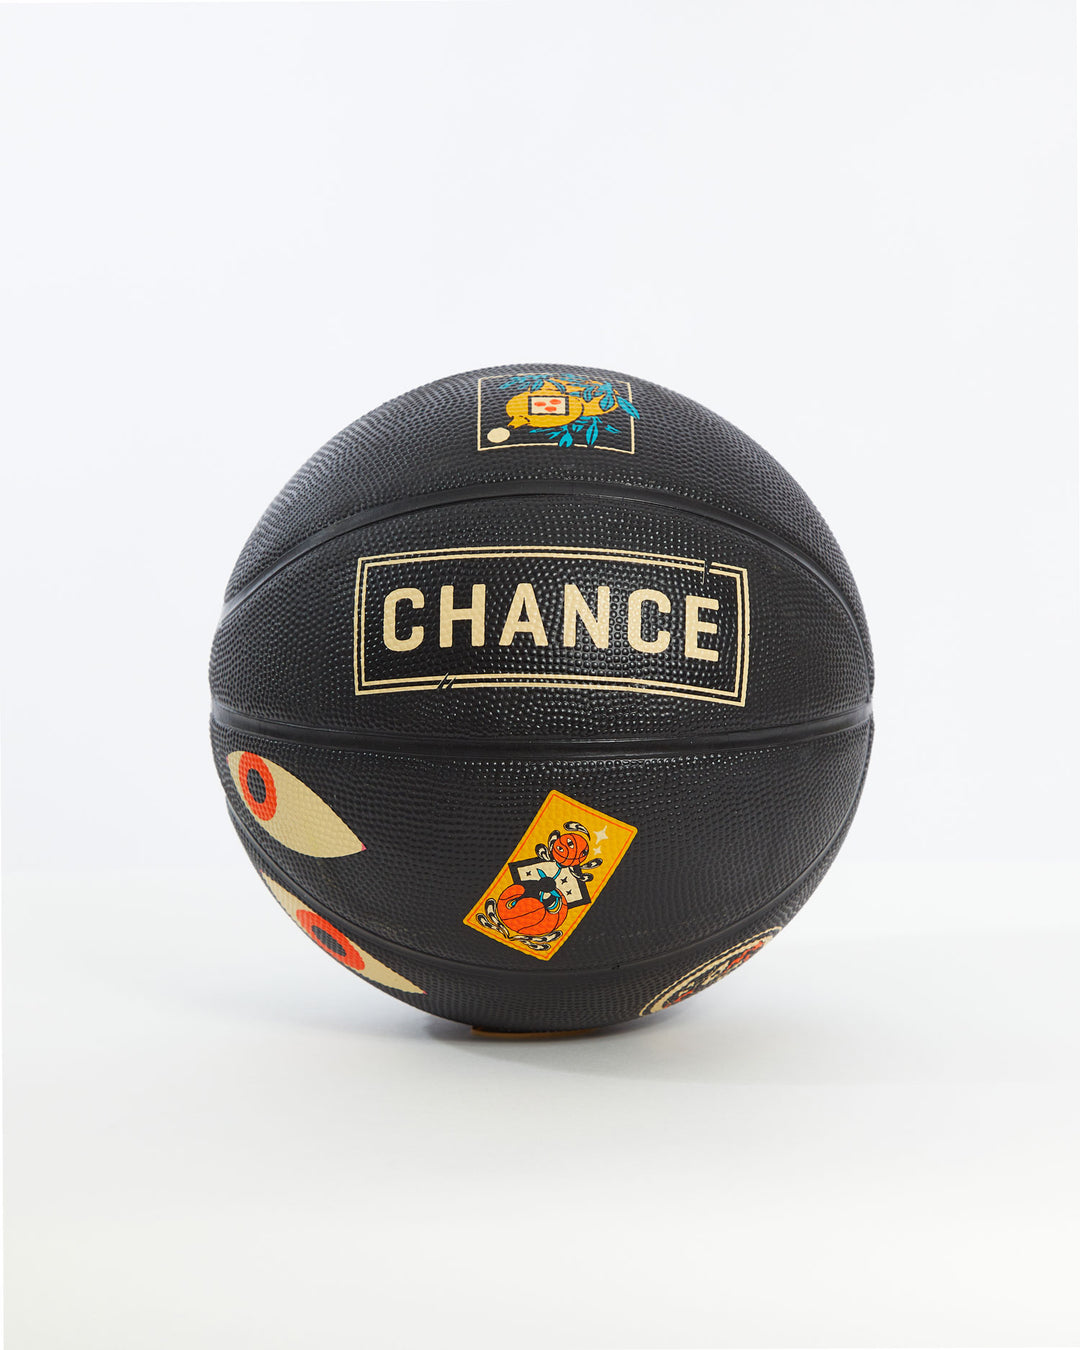 BODHI Recycled Basketball – Chance